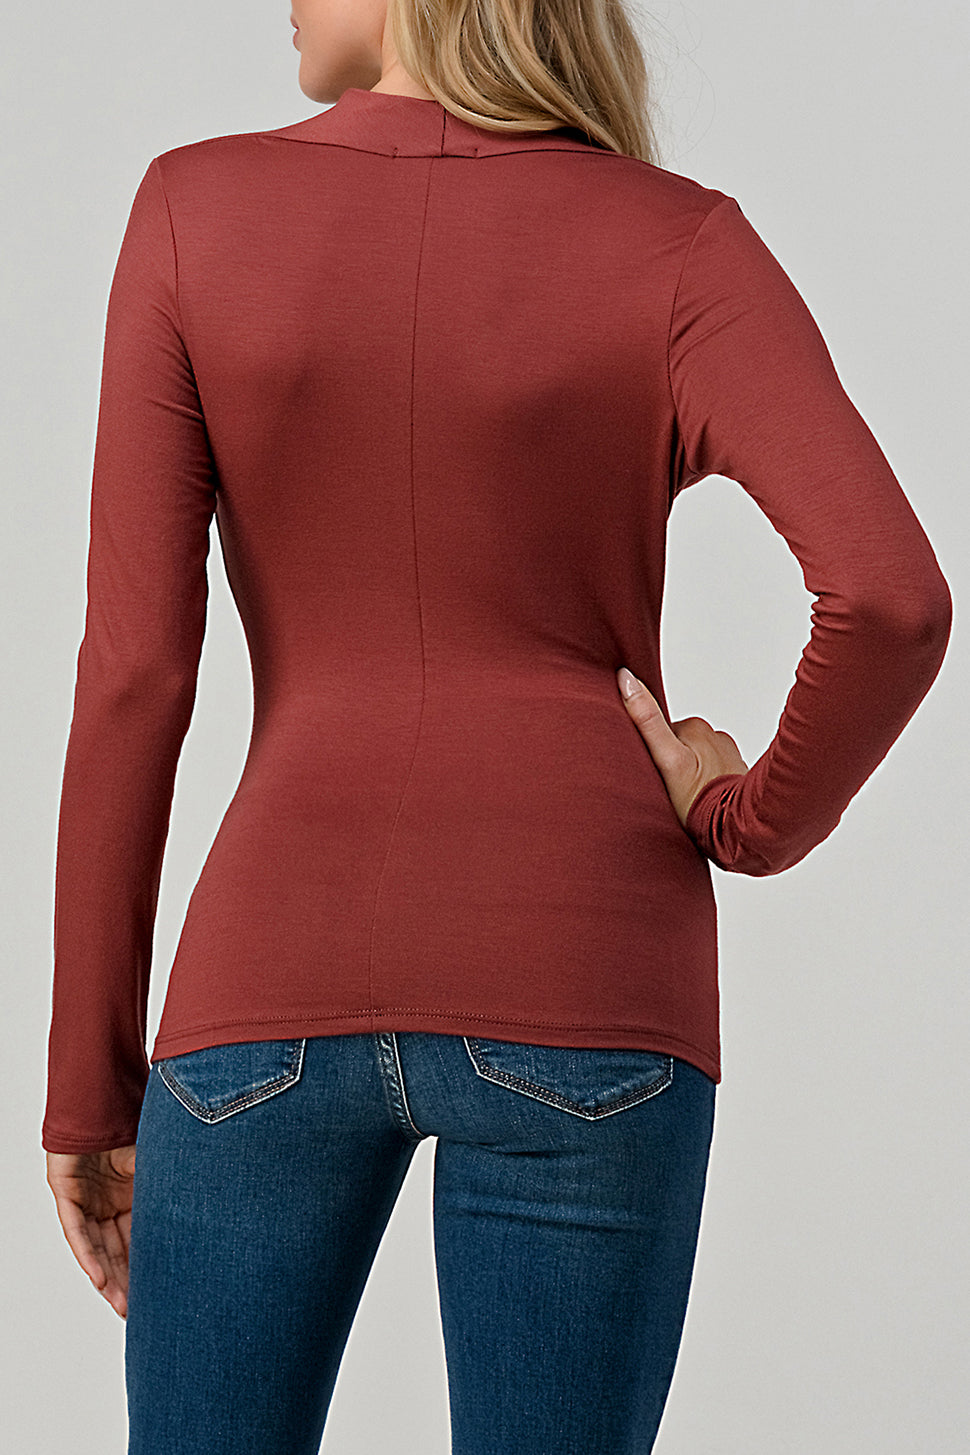 Natural Vibe Modal Wrap Blouse (Red Clay)